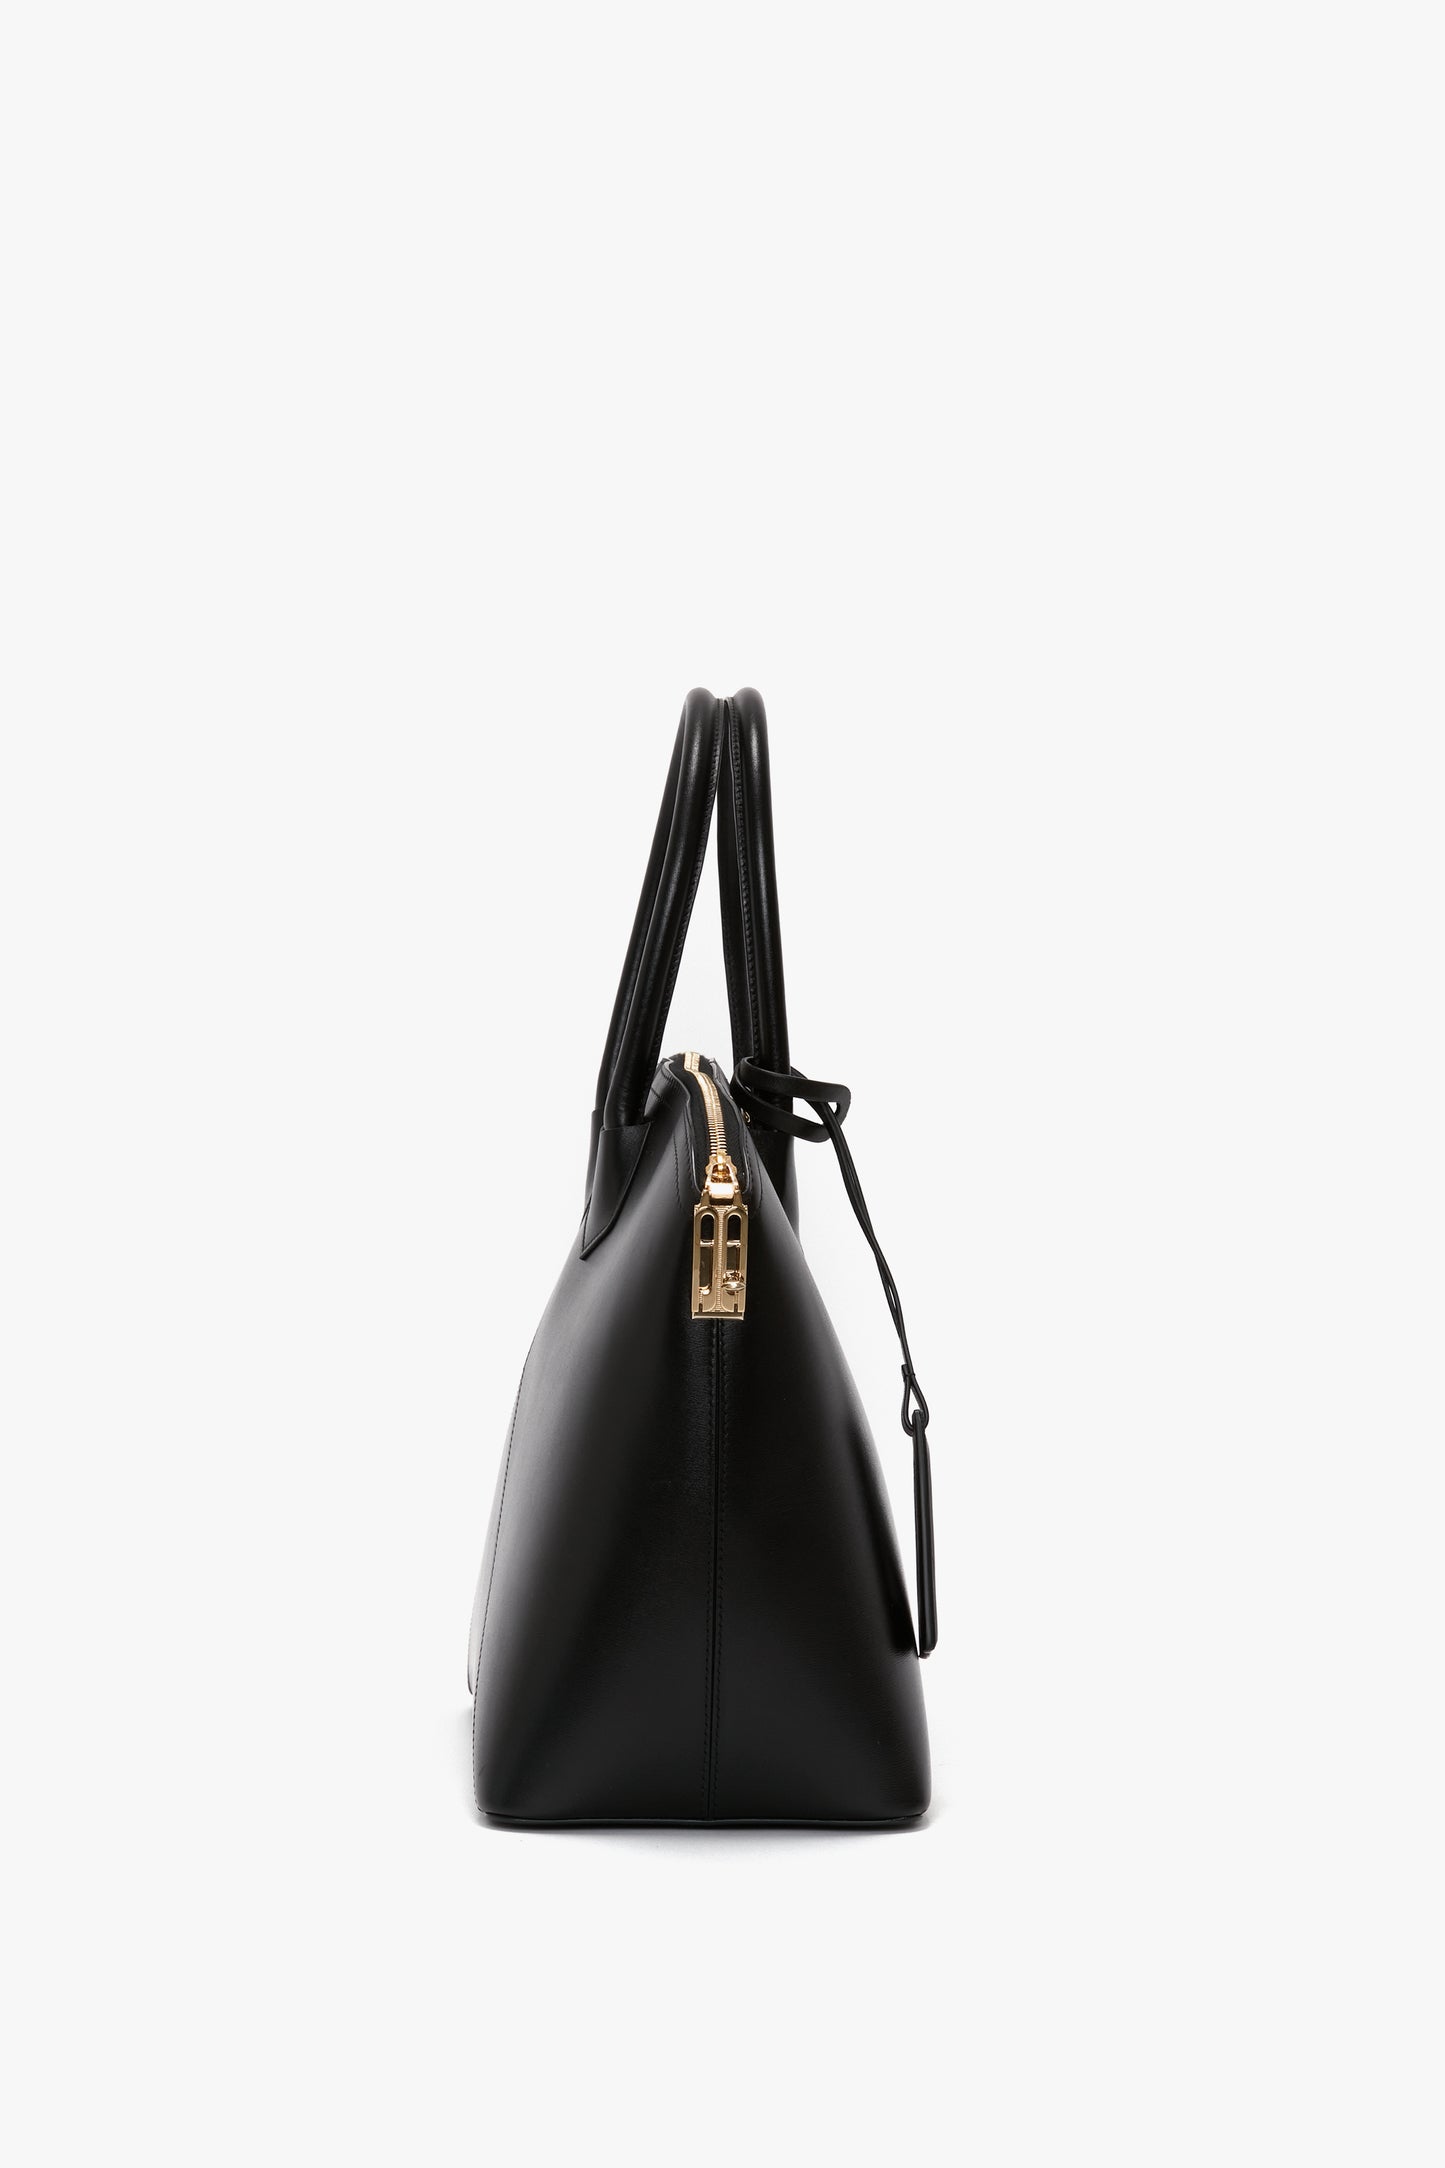 Side view of the Victoria Bag In Black Leather by Victoria Beckham, a versatile hold-all featuring black leather panels, gold zipper closure, and two handles against a white background.